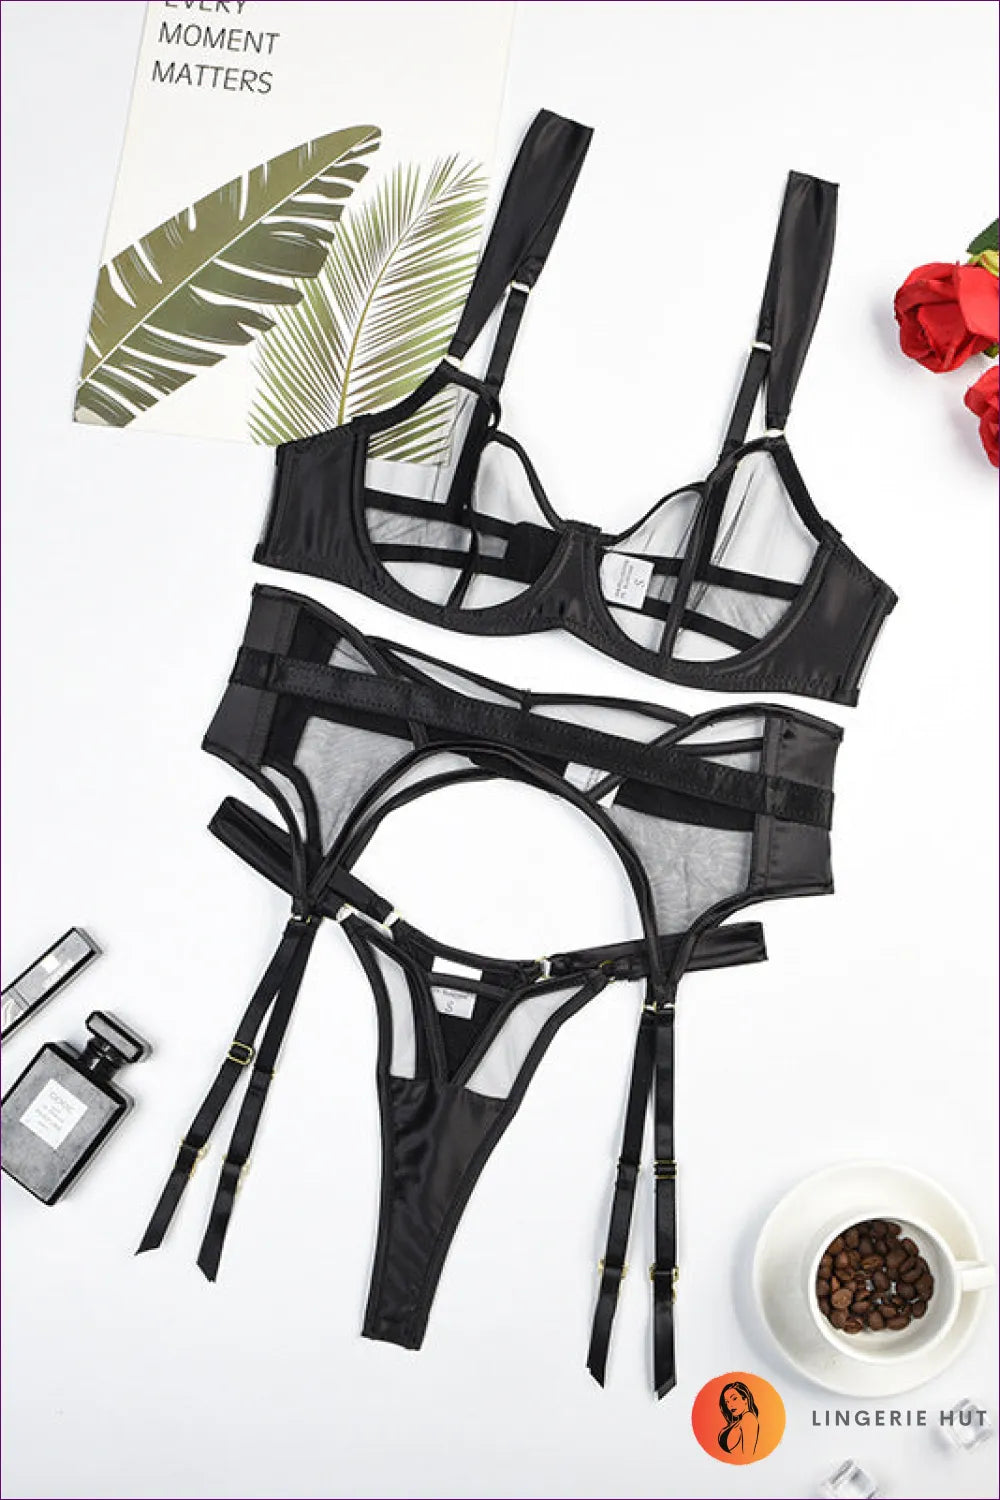 Discover The Secret To Seductive Comfort With Lingerie Hut’s Sexy Sheer Mesh Push-up Set. a Three-piece